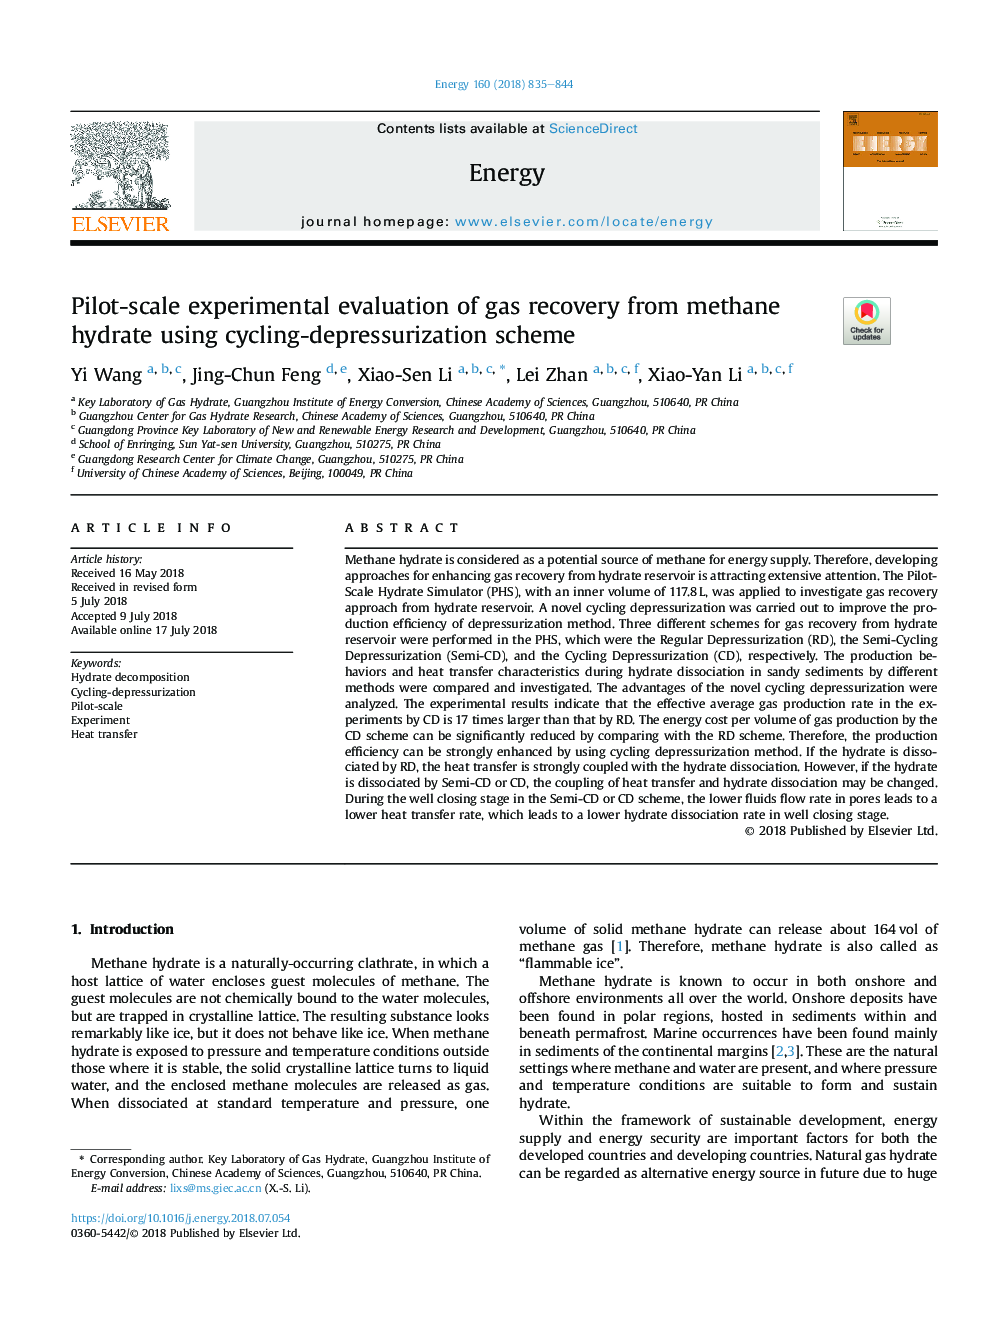 Pilot-scale experimental evaluation of gas recovery from methane hydrate using cycling-depressurization scheme